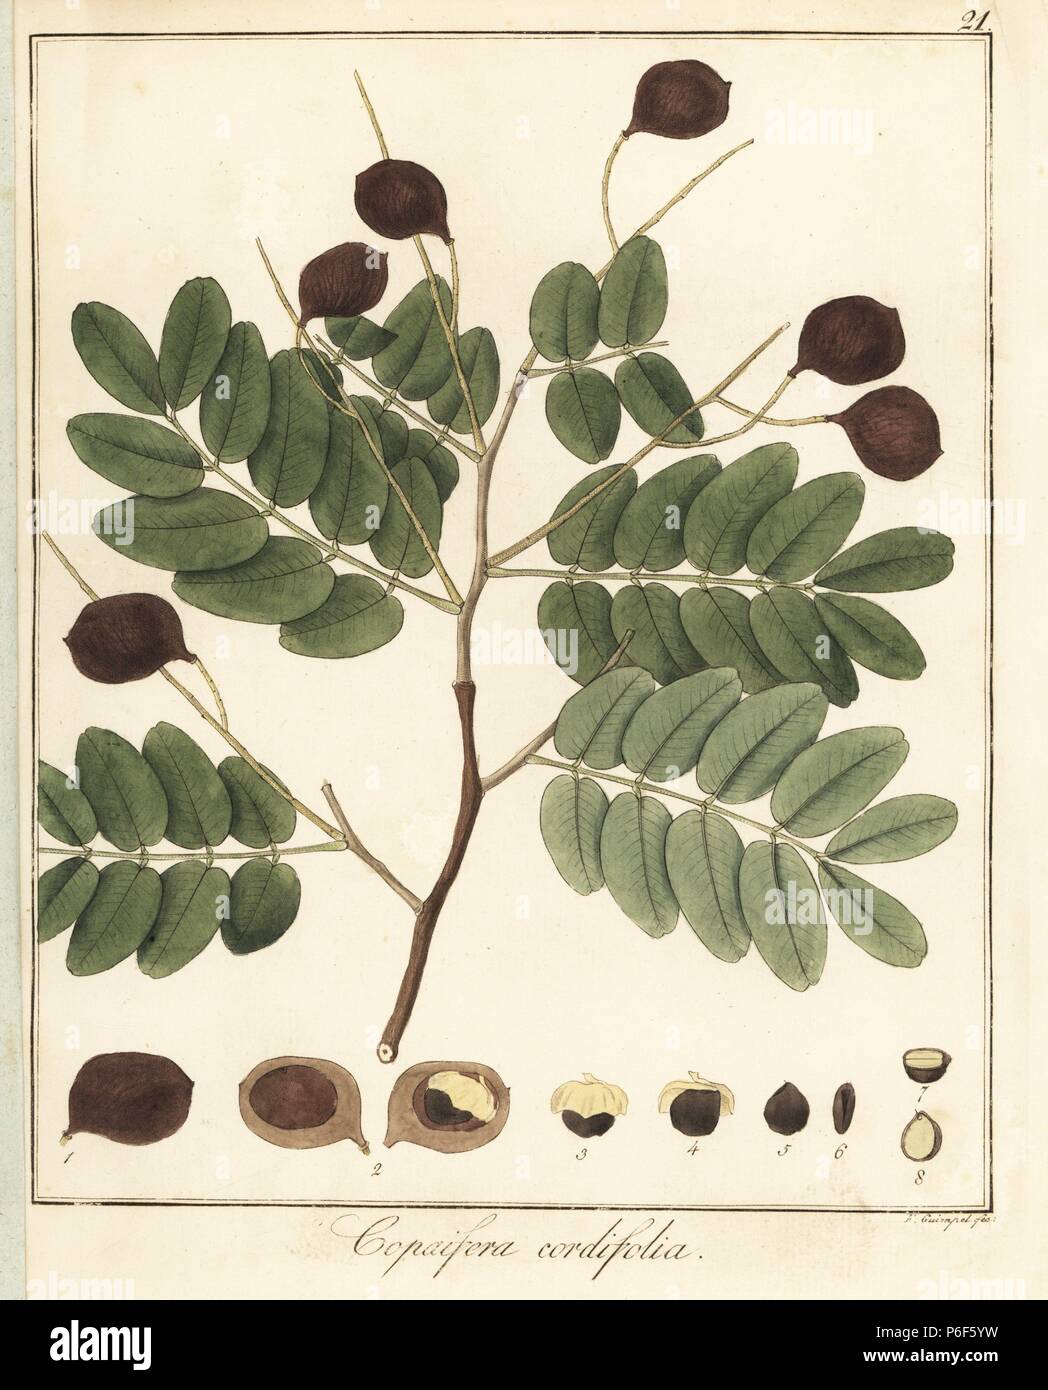 Copal or copaiba tree, Copaifera coriacea. Handcoloured copperplate engraving by F. Guimpel from Dr. Friedrich Gottlob Hayne's Medical Botany, Berlin, 1822. Hayne (1763-1832) was a German botanist, apothecary and professor of pharmaceutical botany at Berlin University. Stock Photo